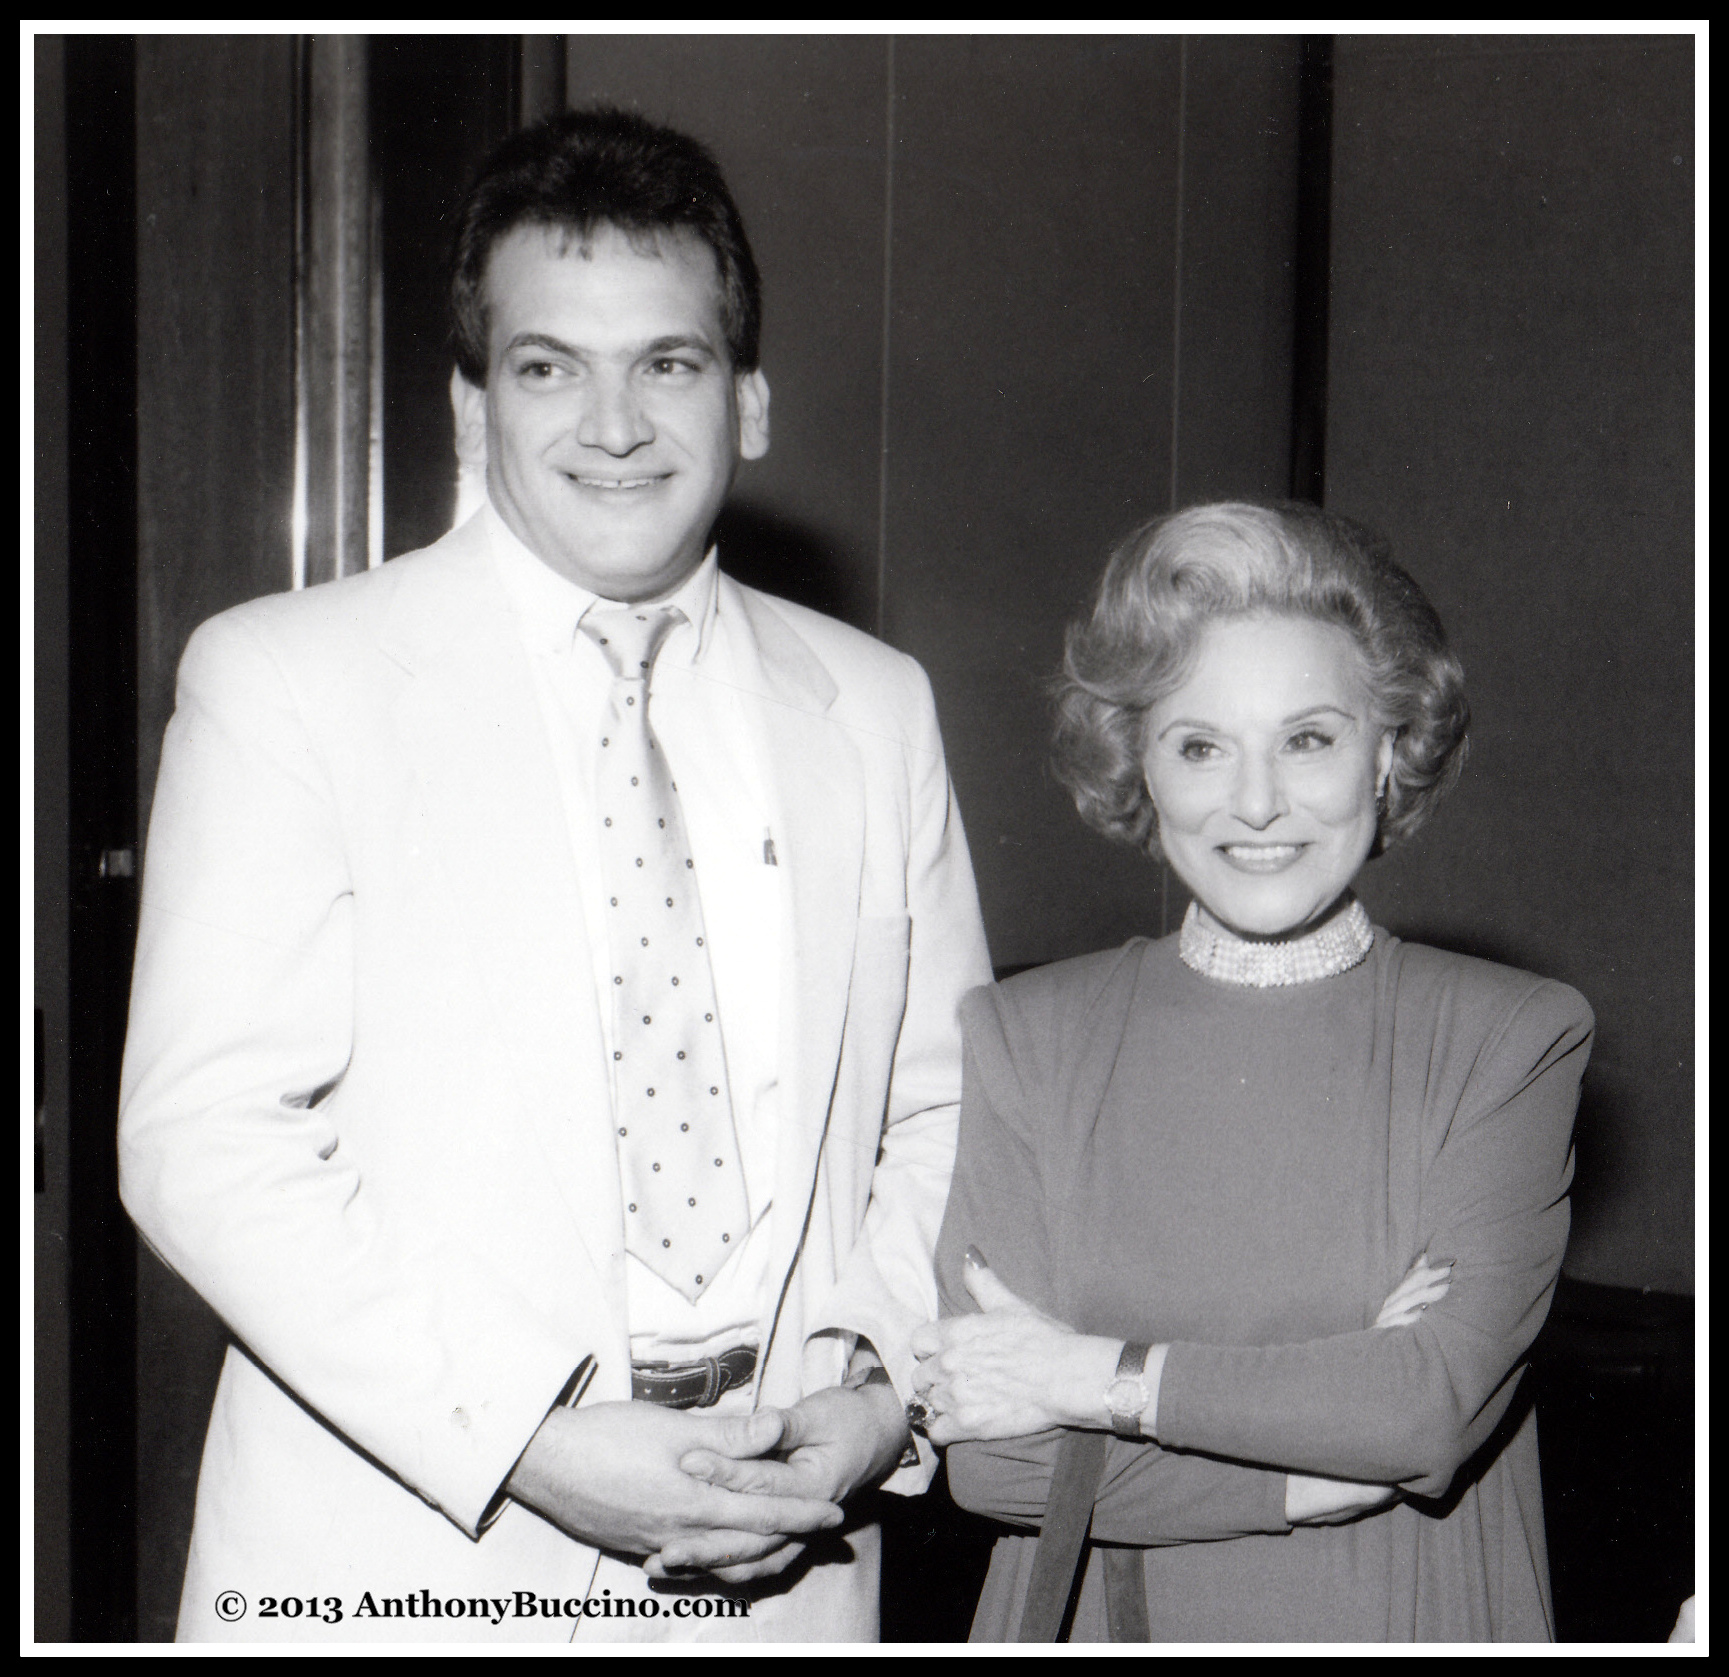 Anthony Buccino and Dear Abby in a BBSI file photograph.